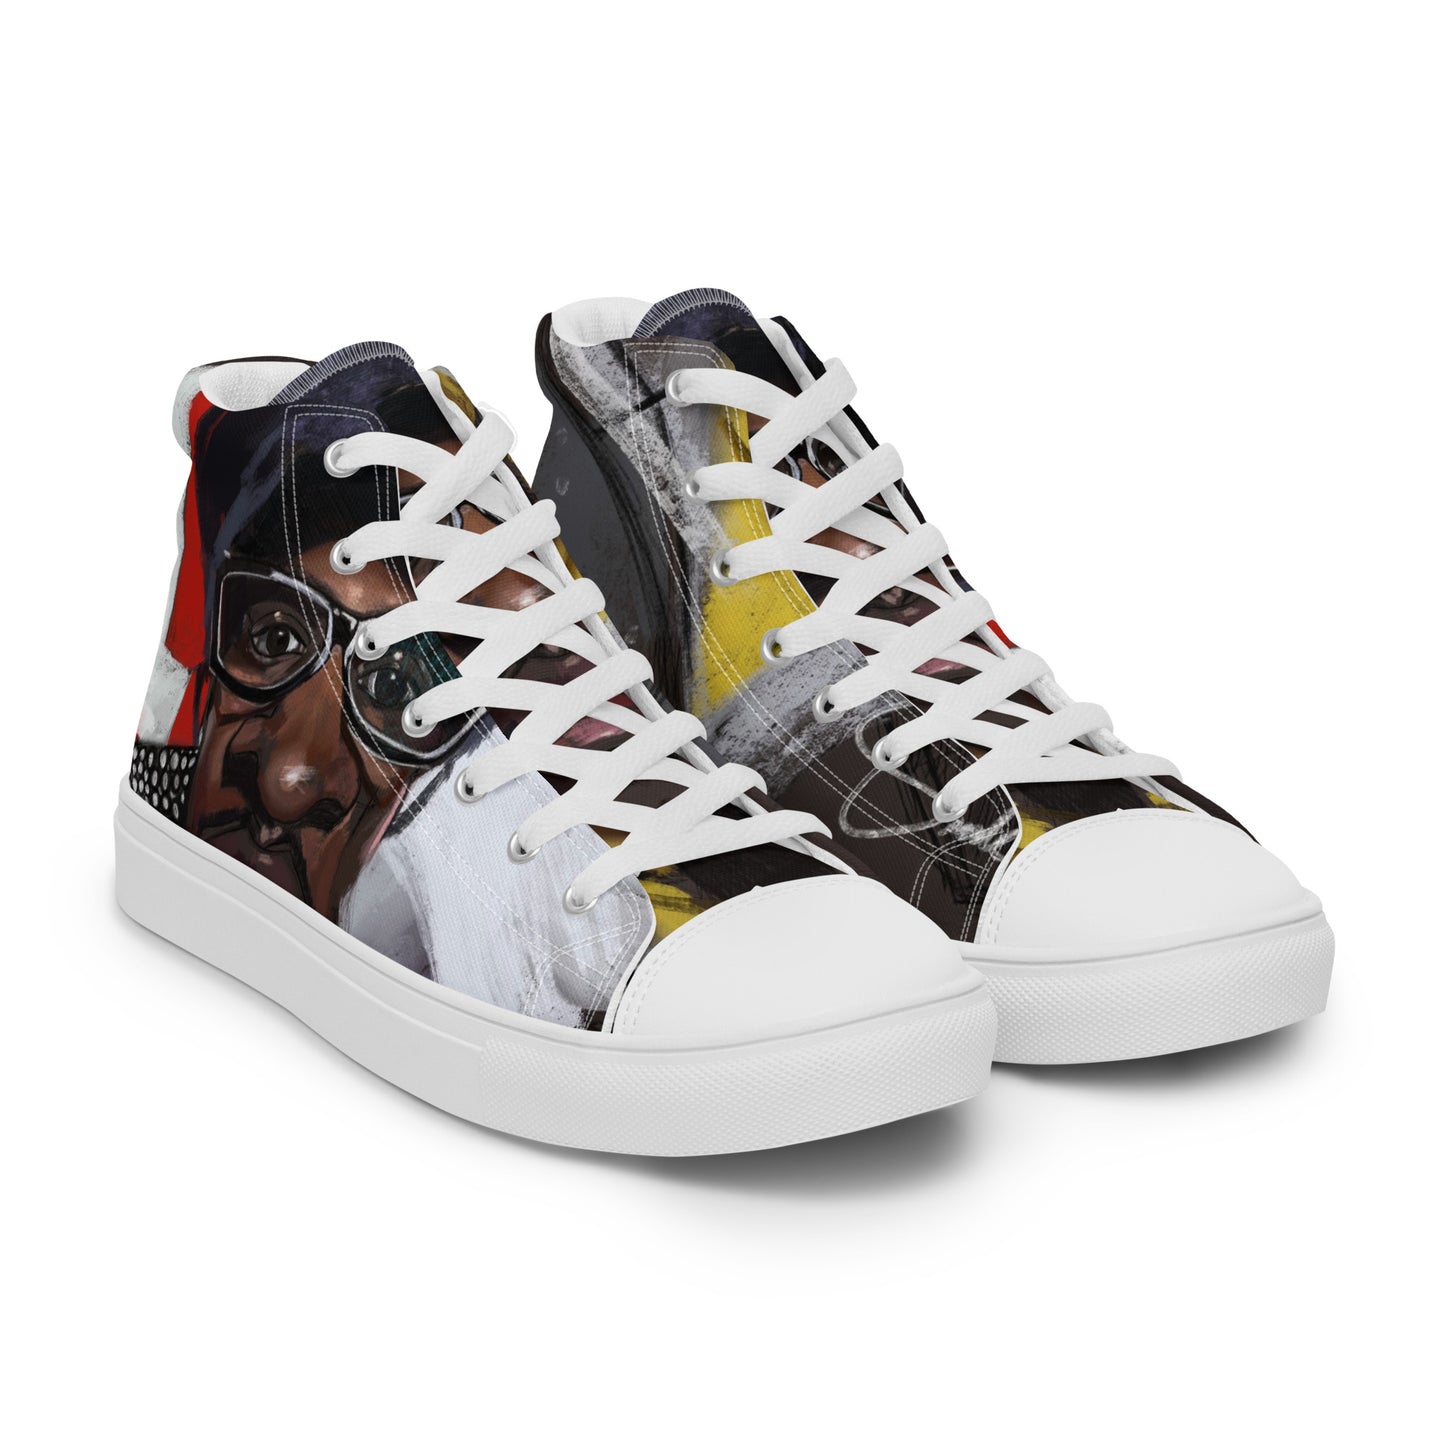 3 Stacks Men’s high top canvas shoes